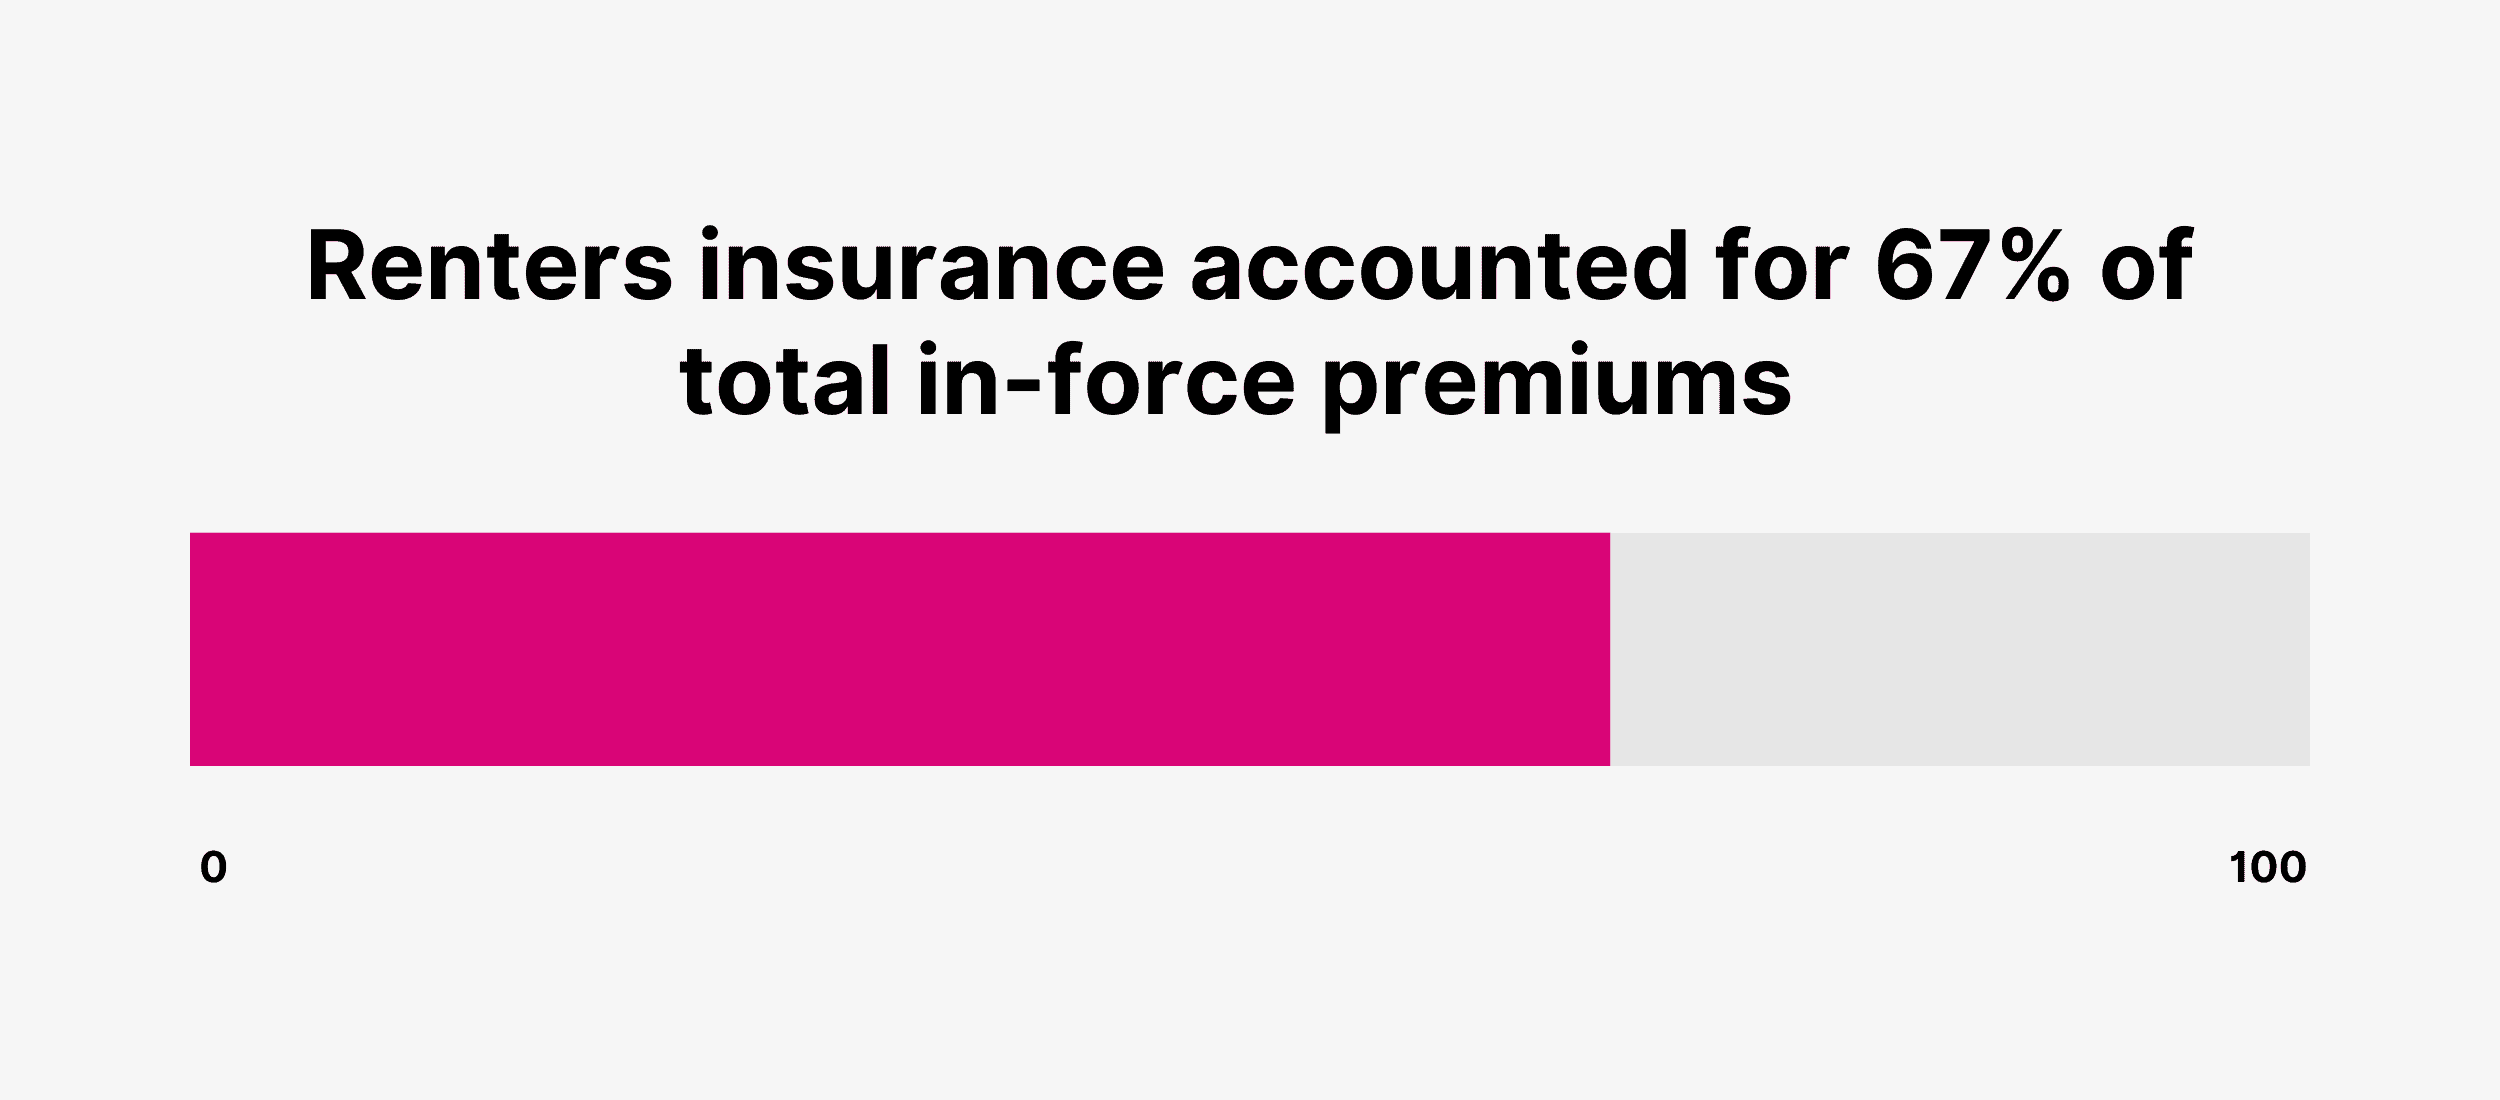 Renters insurance accounted for 67% of total in-force premiums